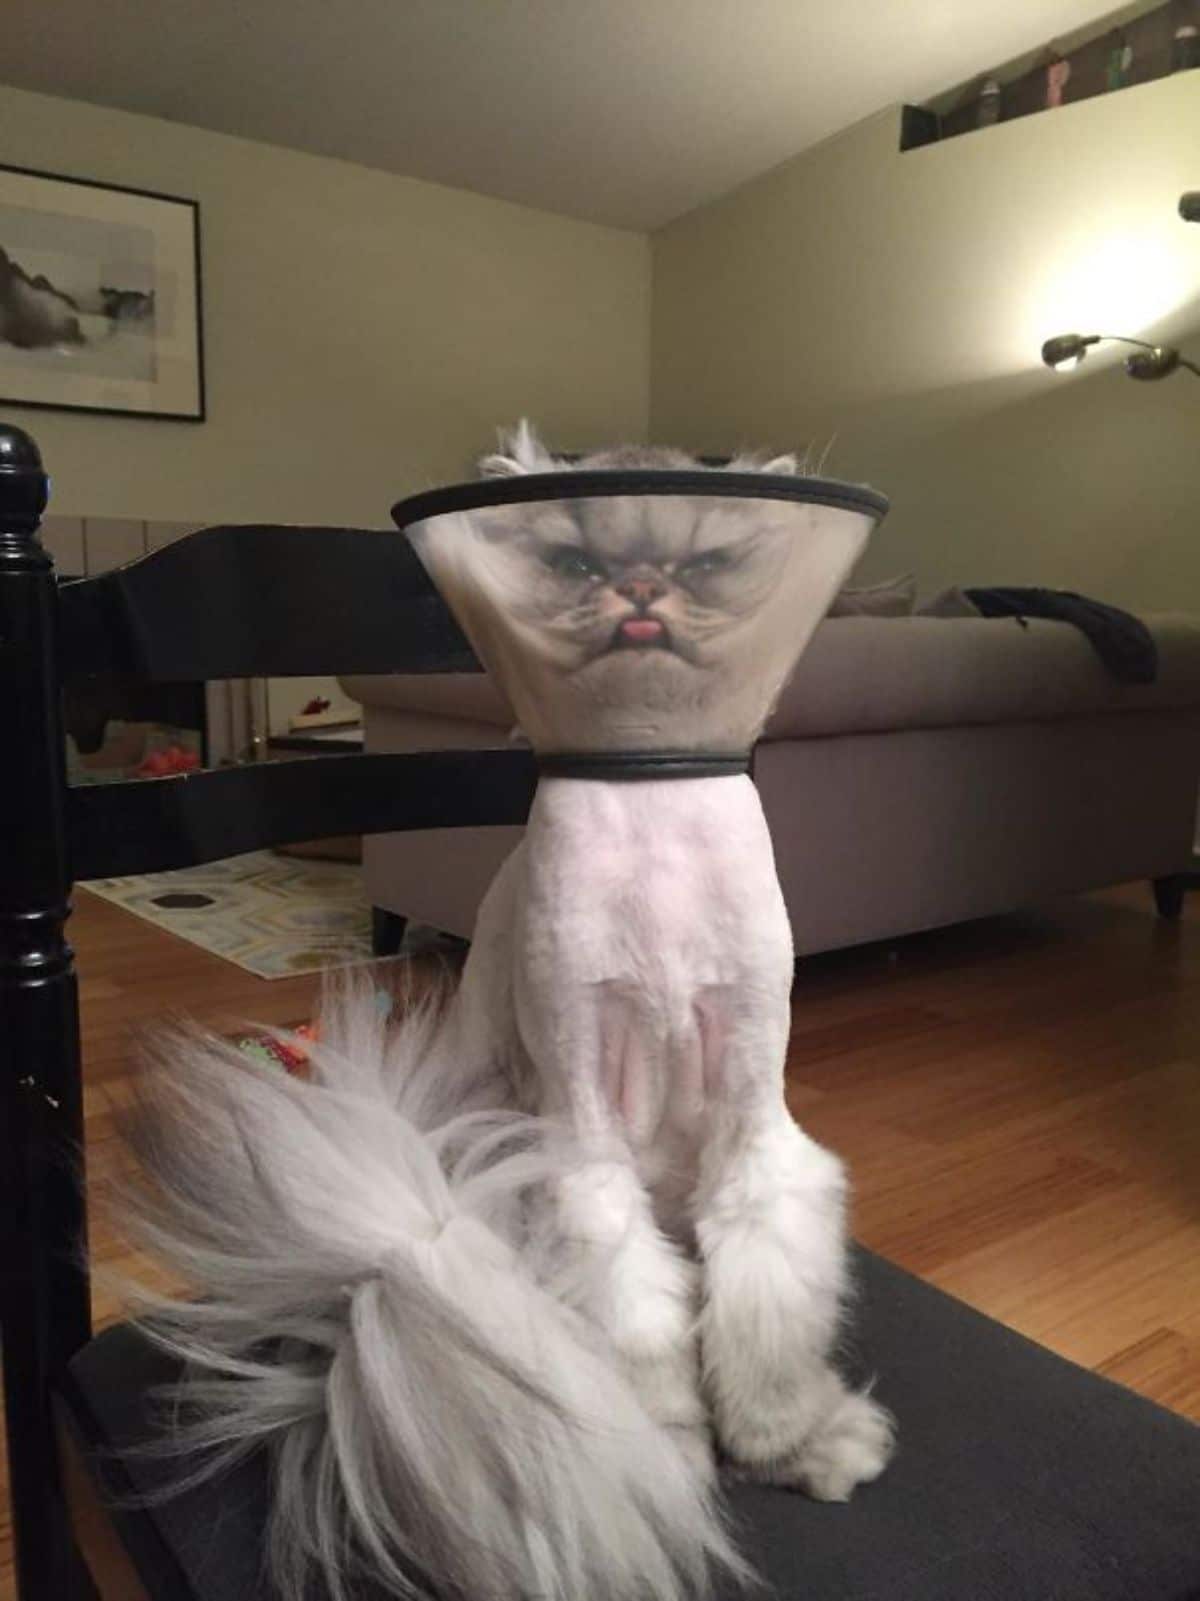 fluffy white cat with the body shaved and wearing a plastic elizabethan cone